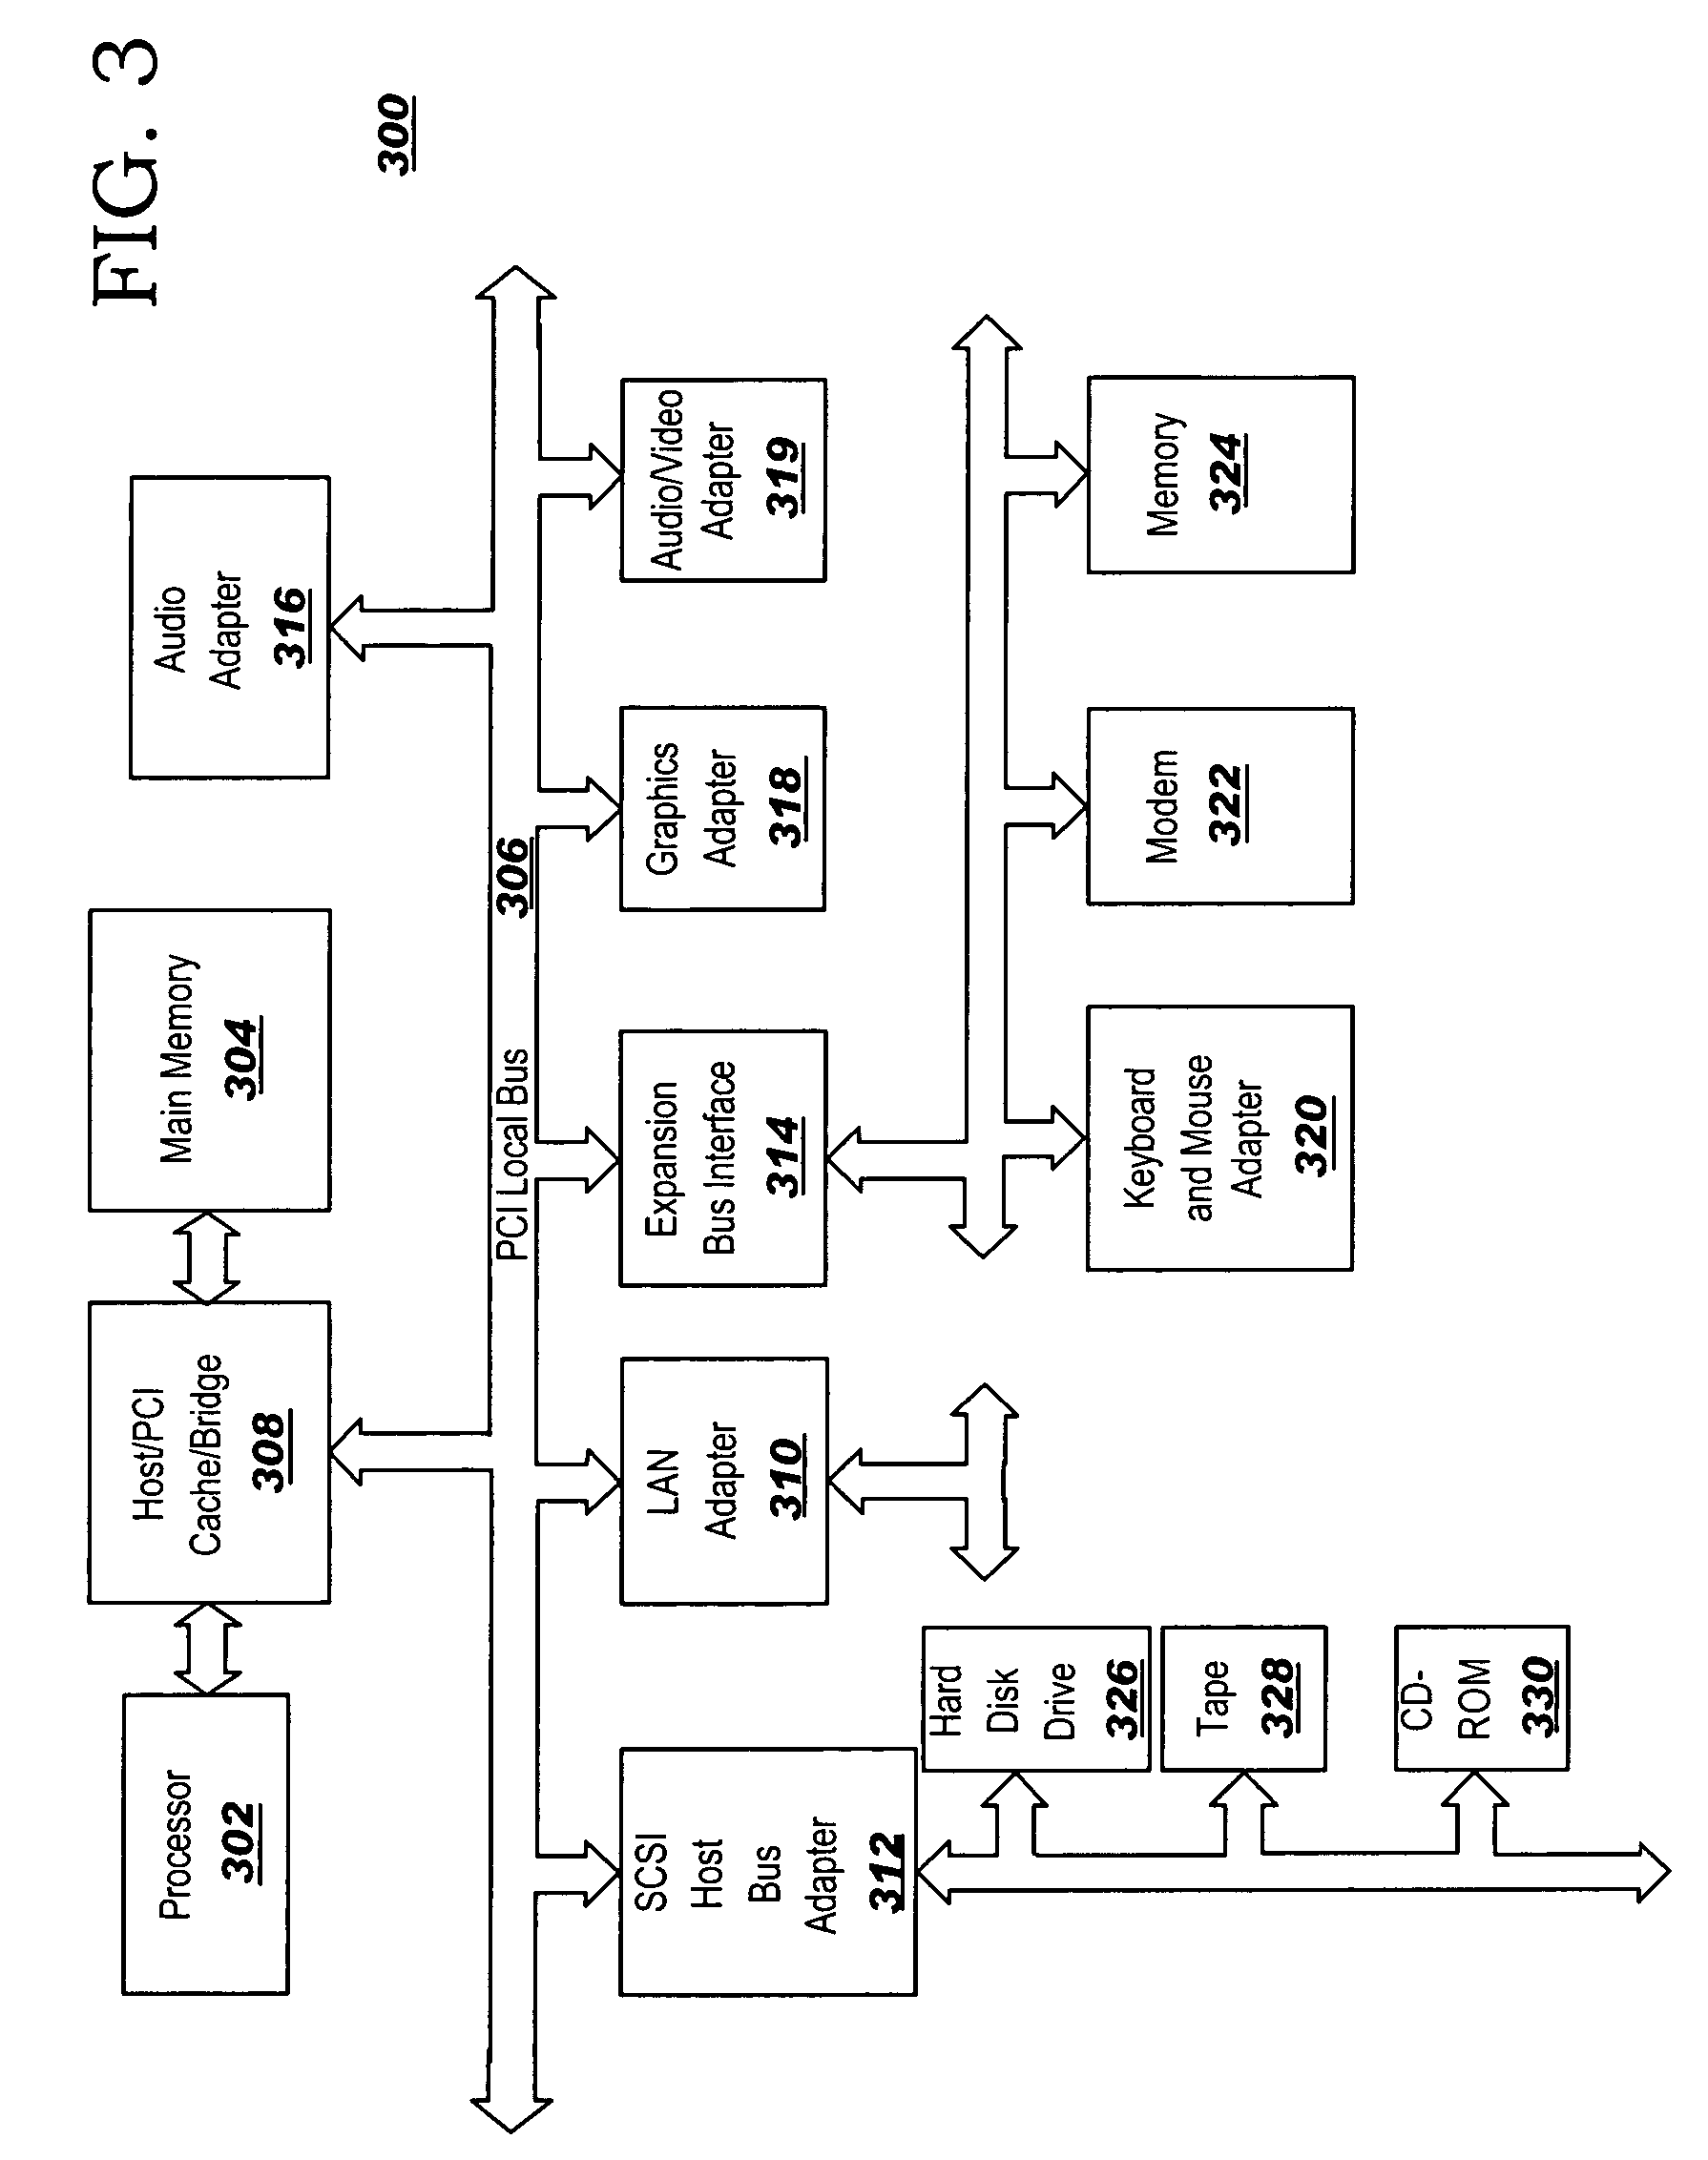 Method and computer program product for enabling dynamic and adaptive business processes through an ontological data model